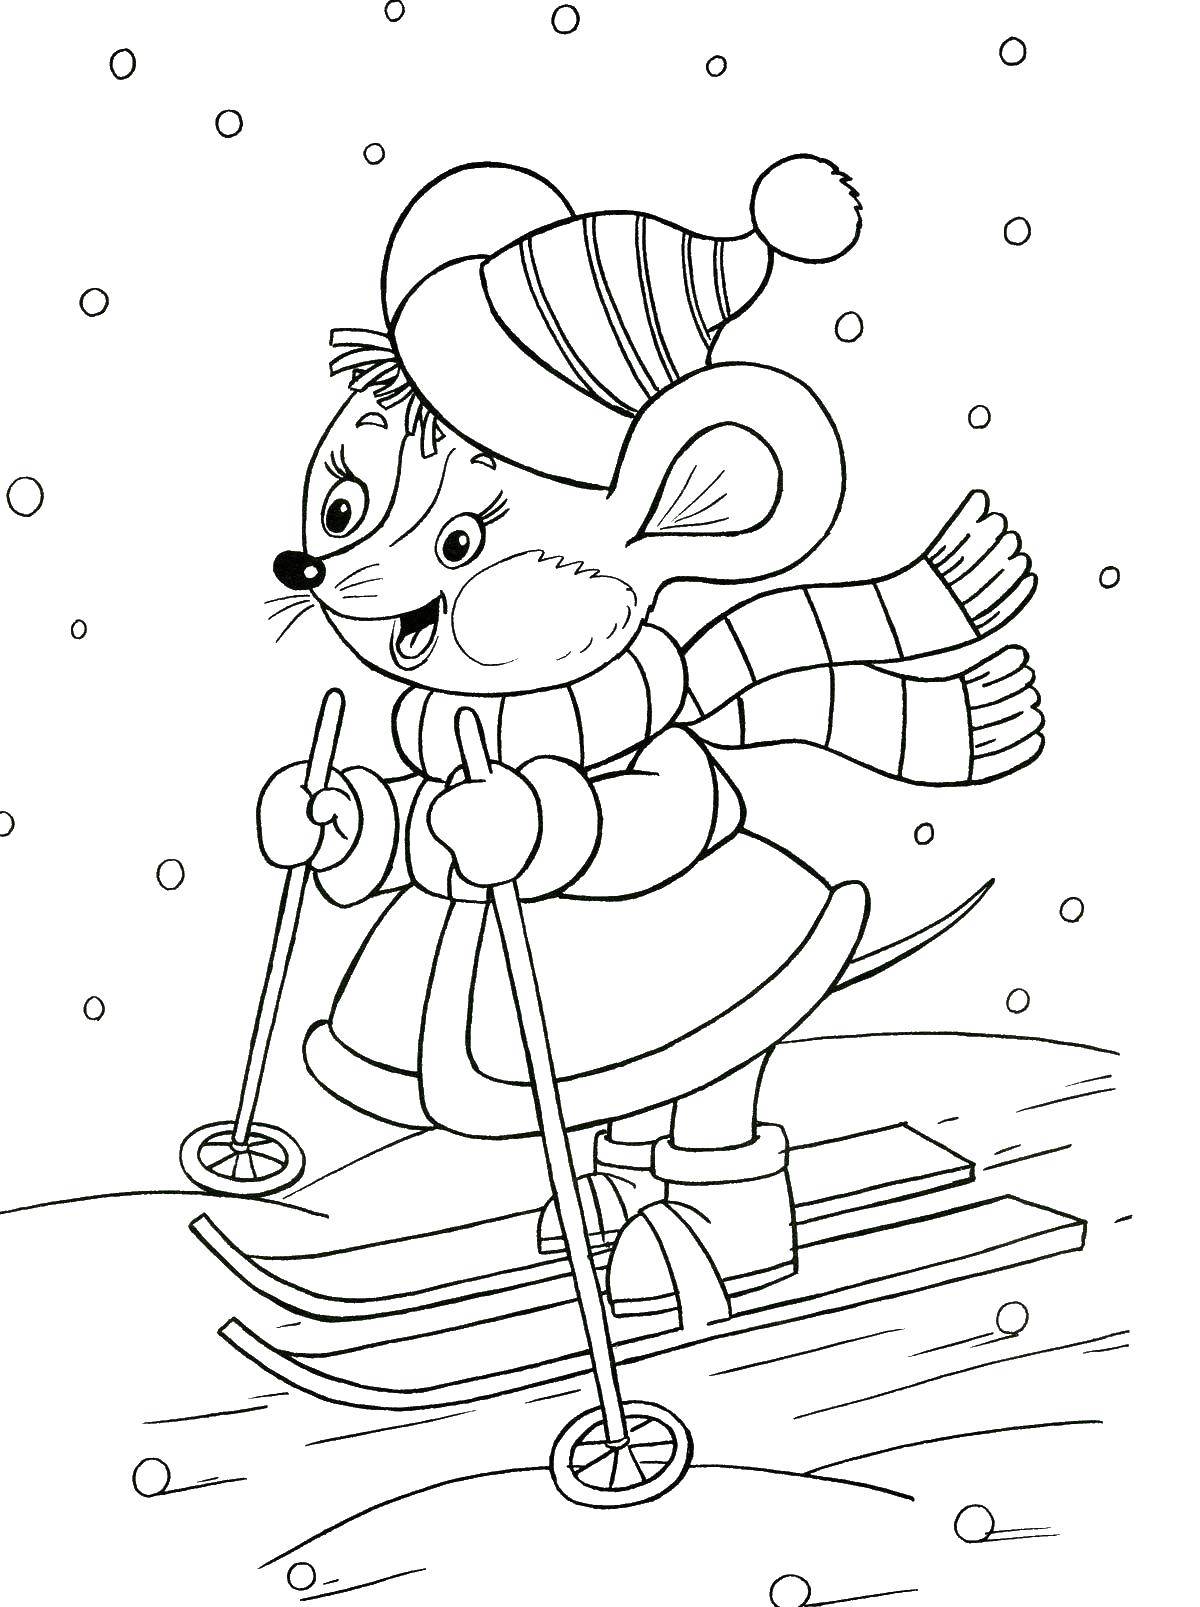 Coloring Mouse skiing. Category skiing. Tags:  mouse, skiing.